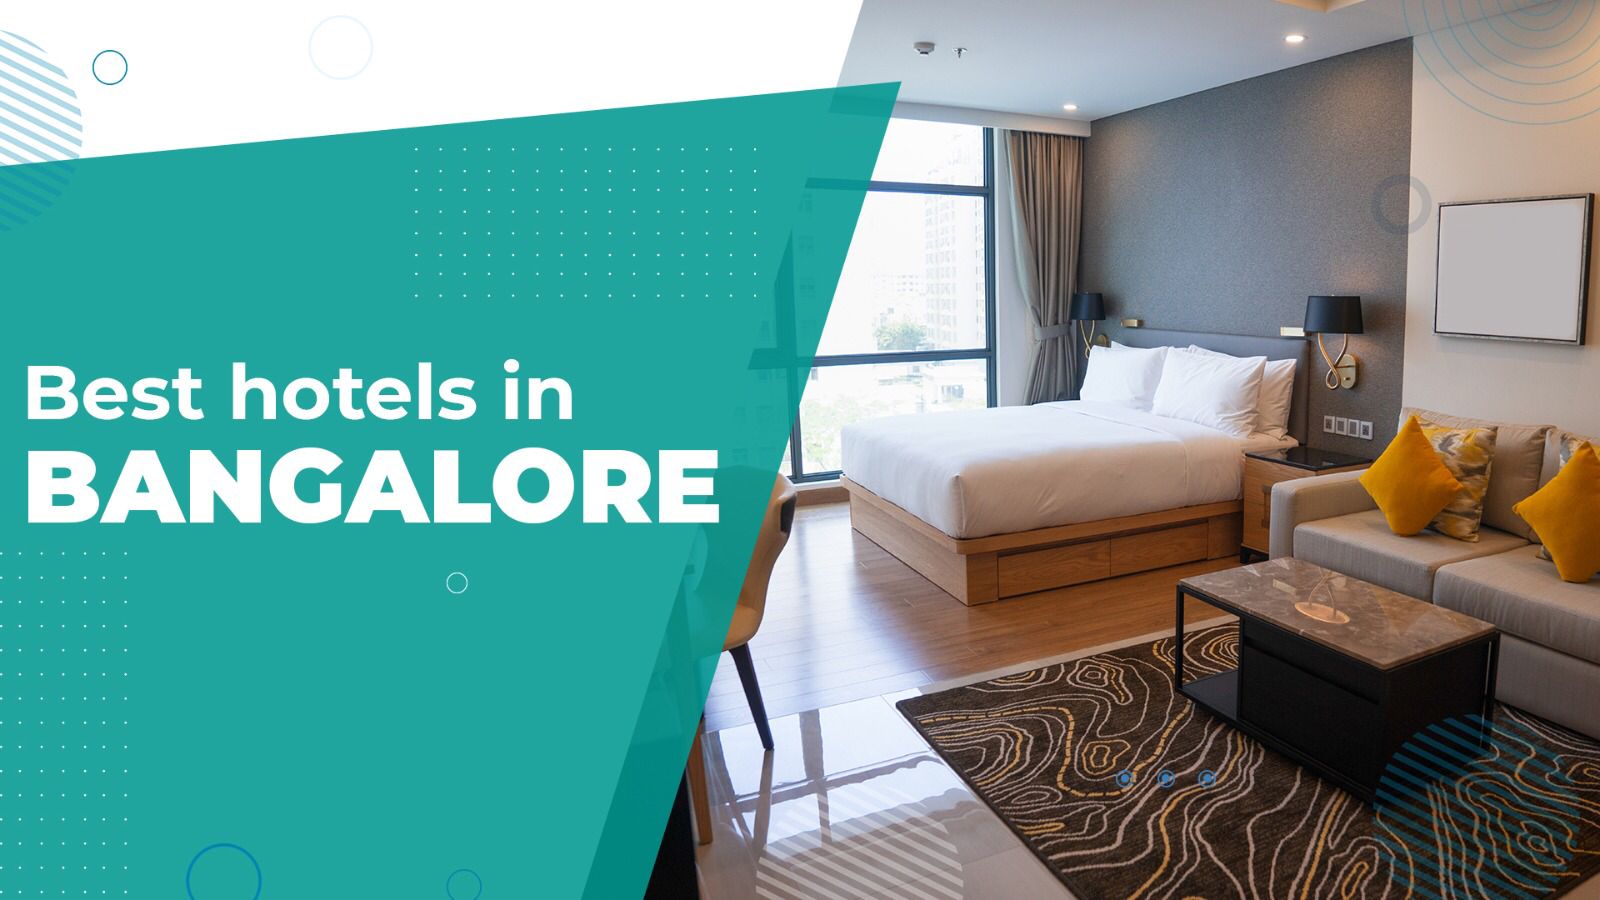 Best hotels in Bangalore